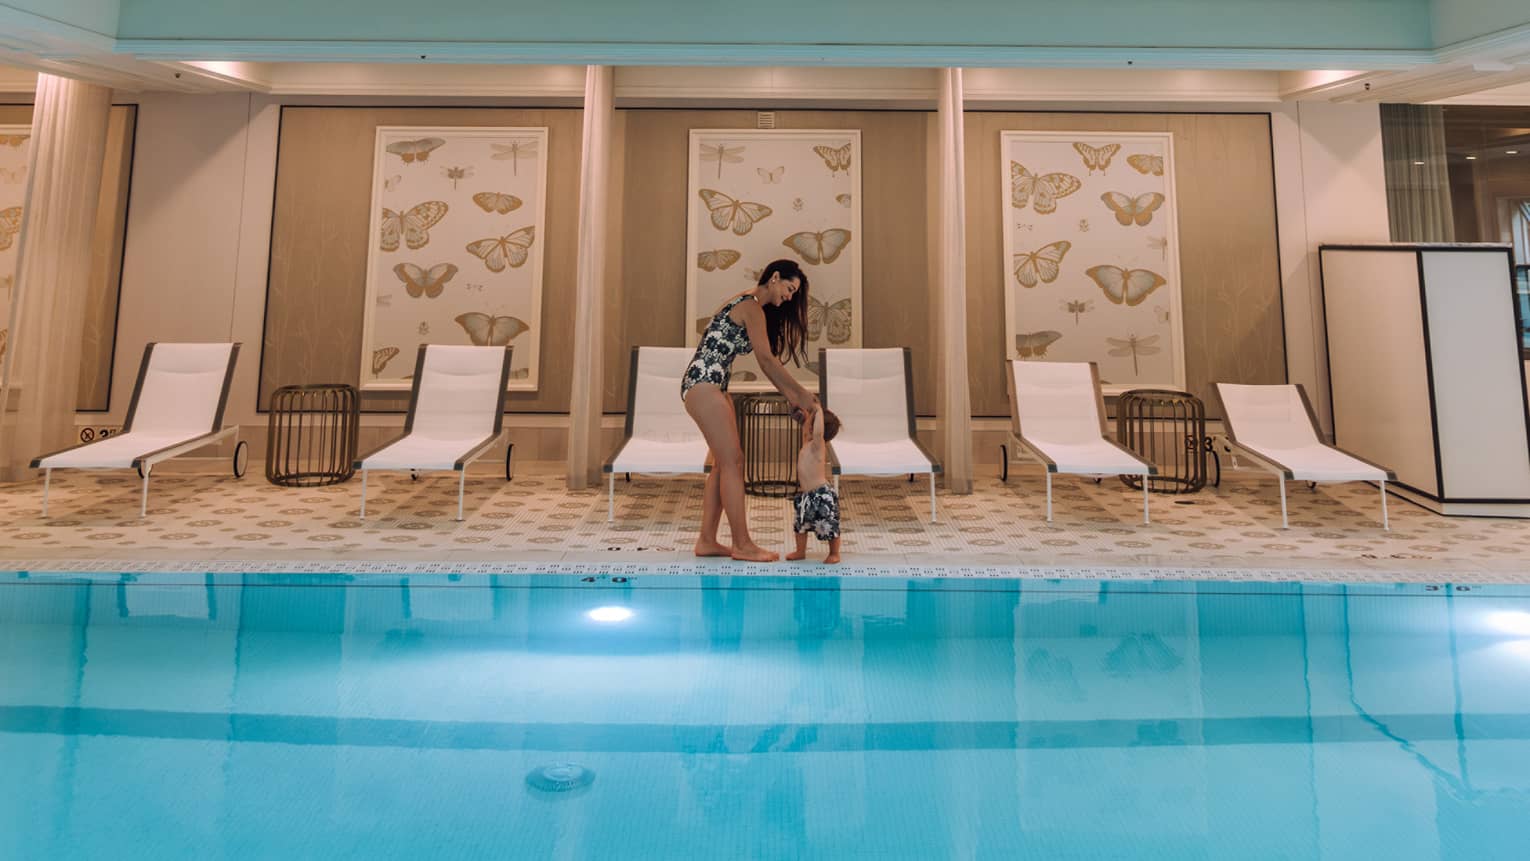 A woman and child standing by an indoor pool and lounge chairs.